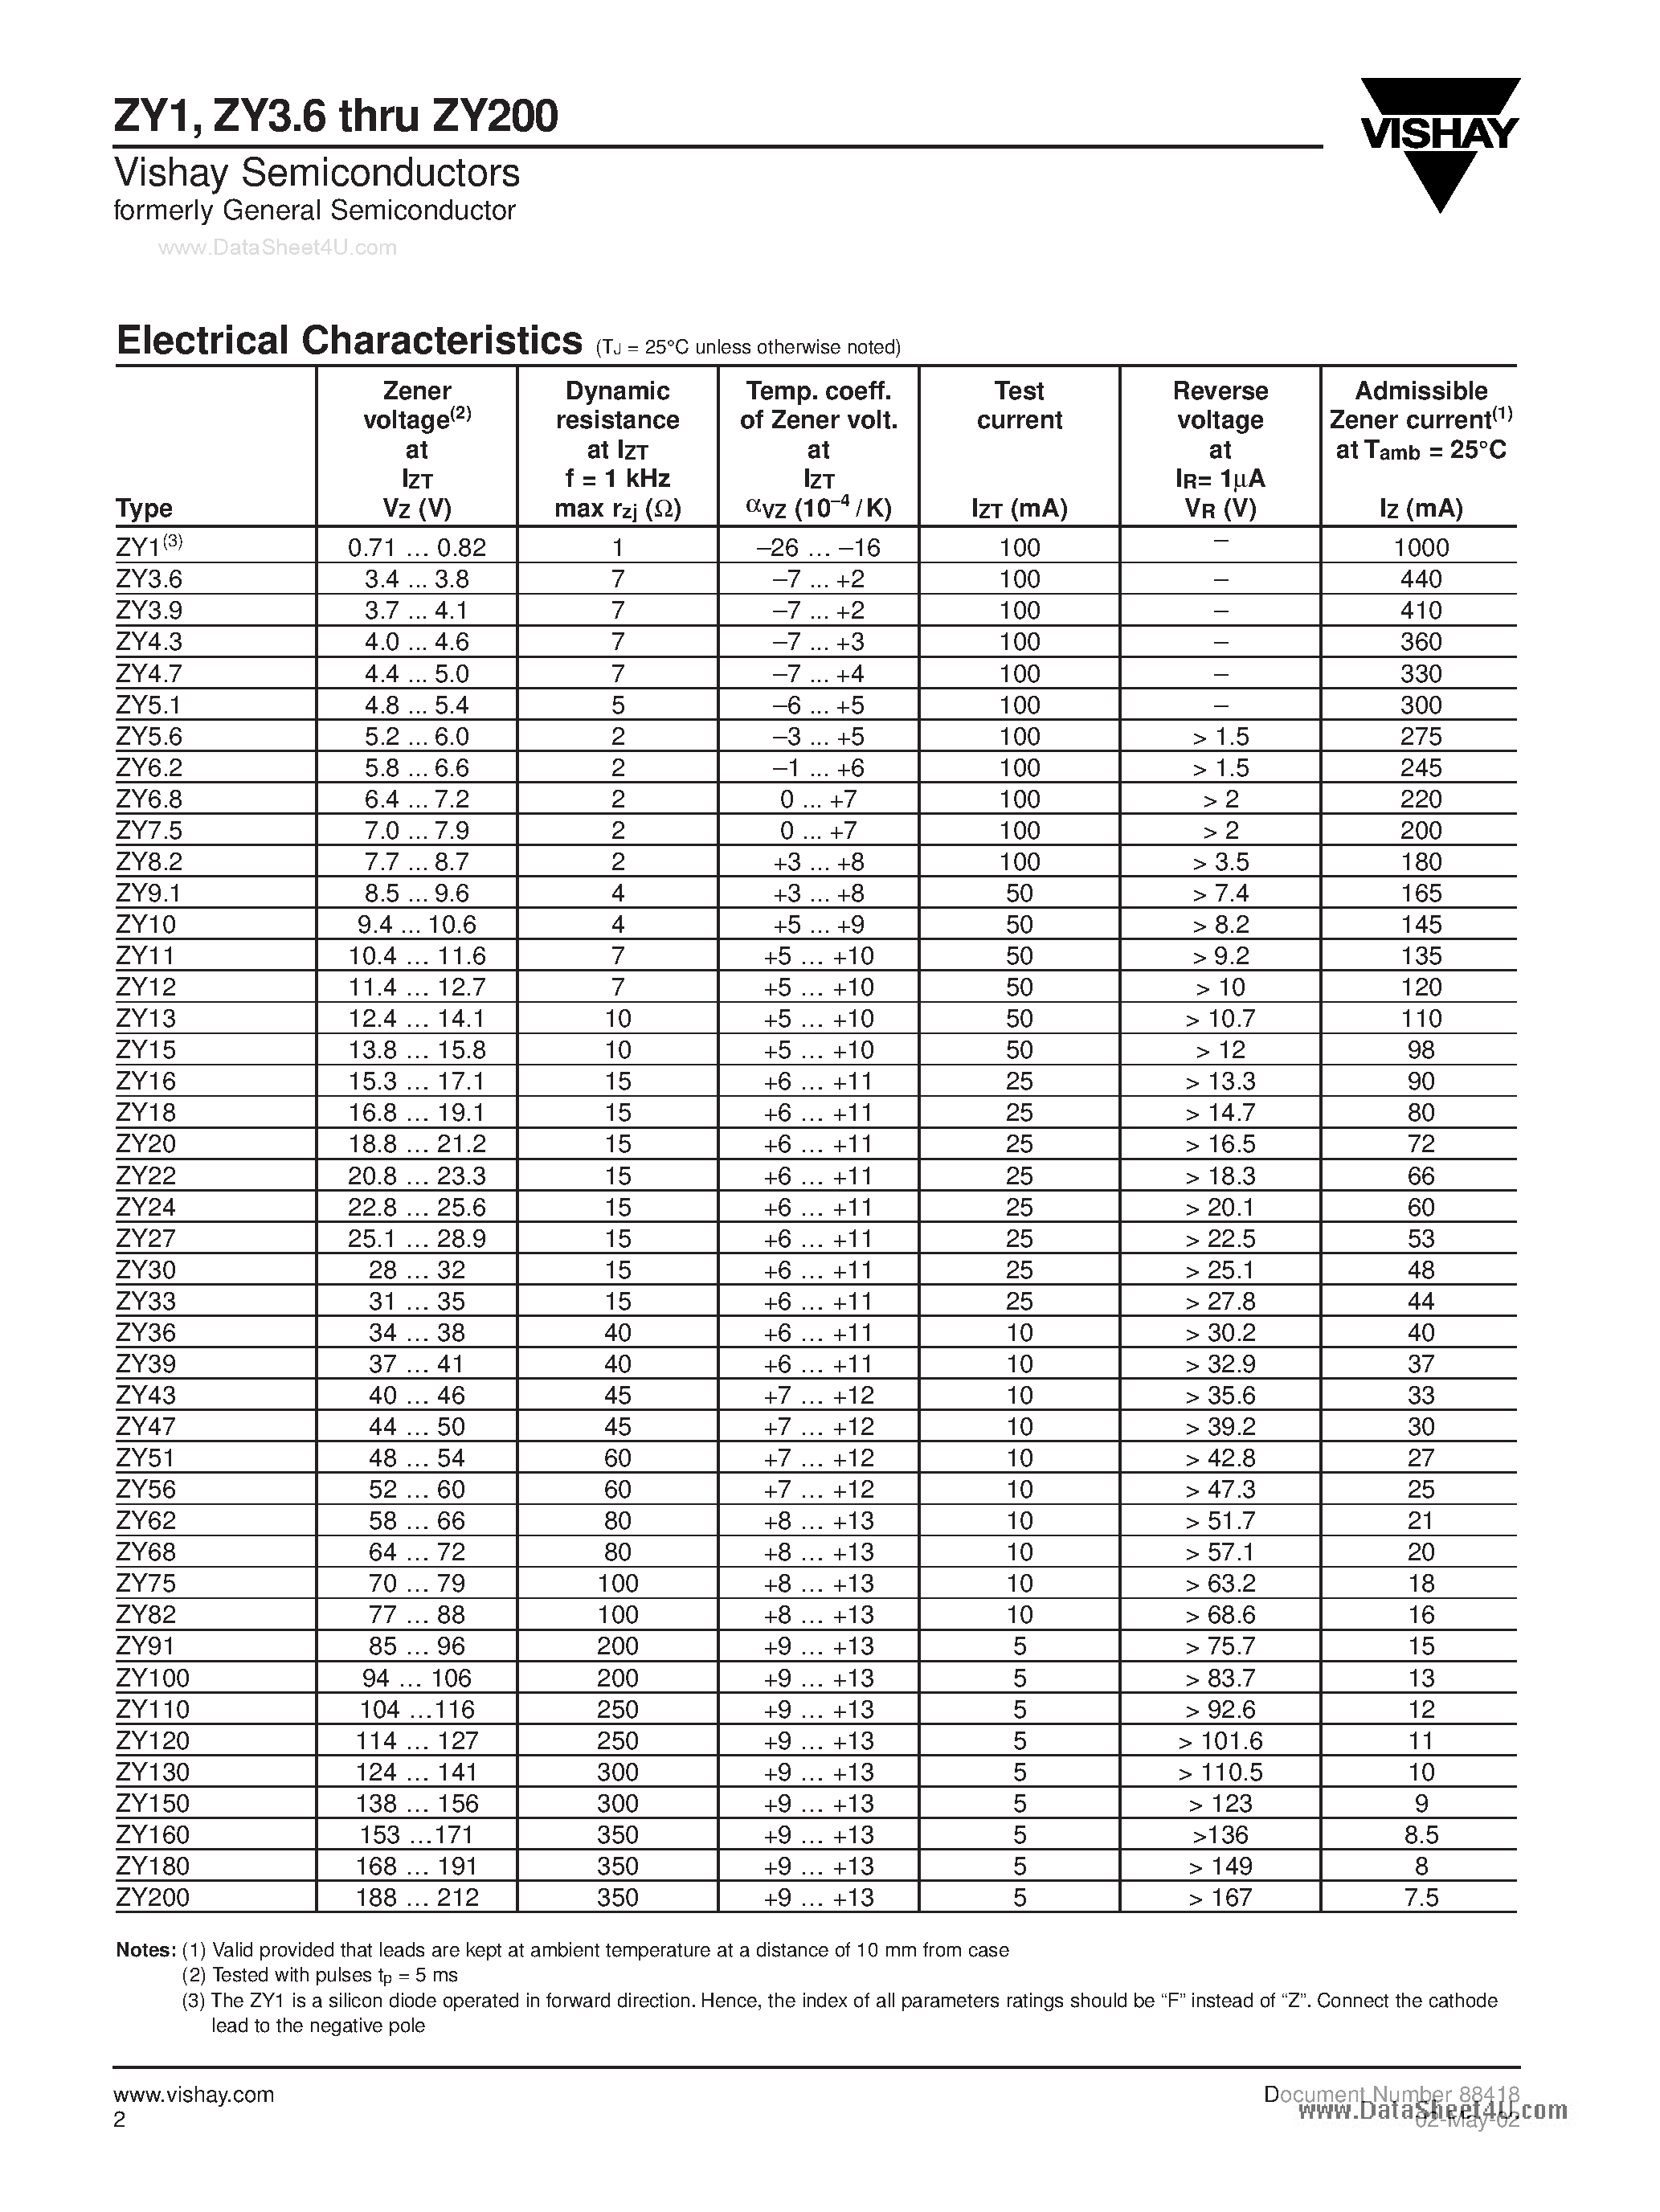 Datasheet ZY7.5 - Zener Diodes page 2